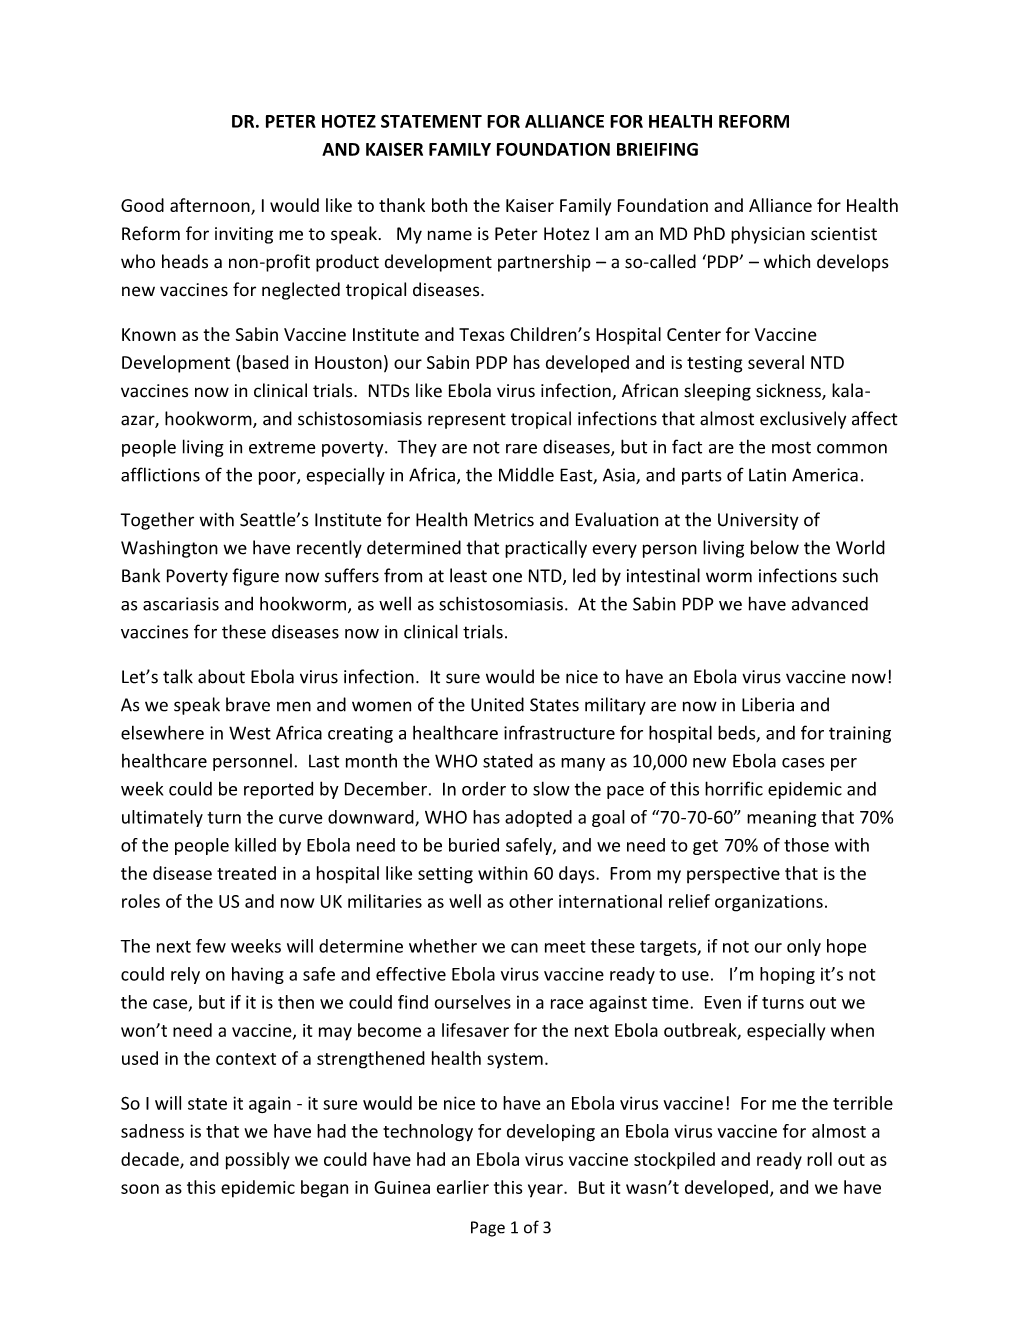 Peter Hotez Statement for Alliance for Health Reform and Kaiser Family Foundation Brieifing